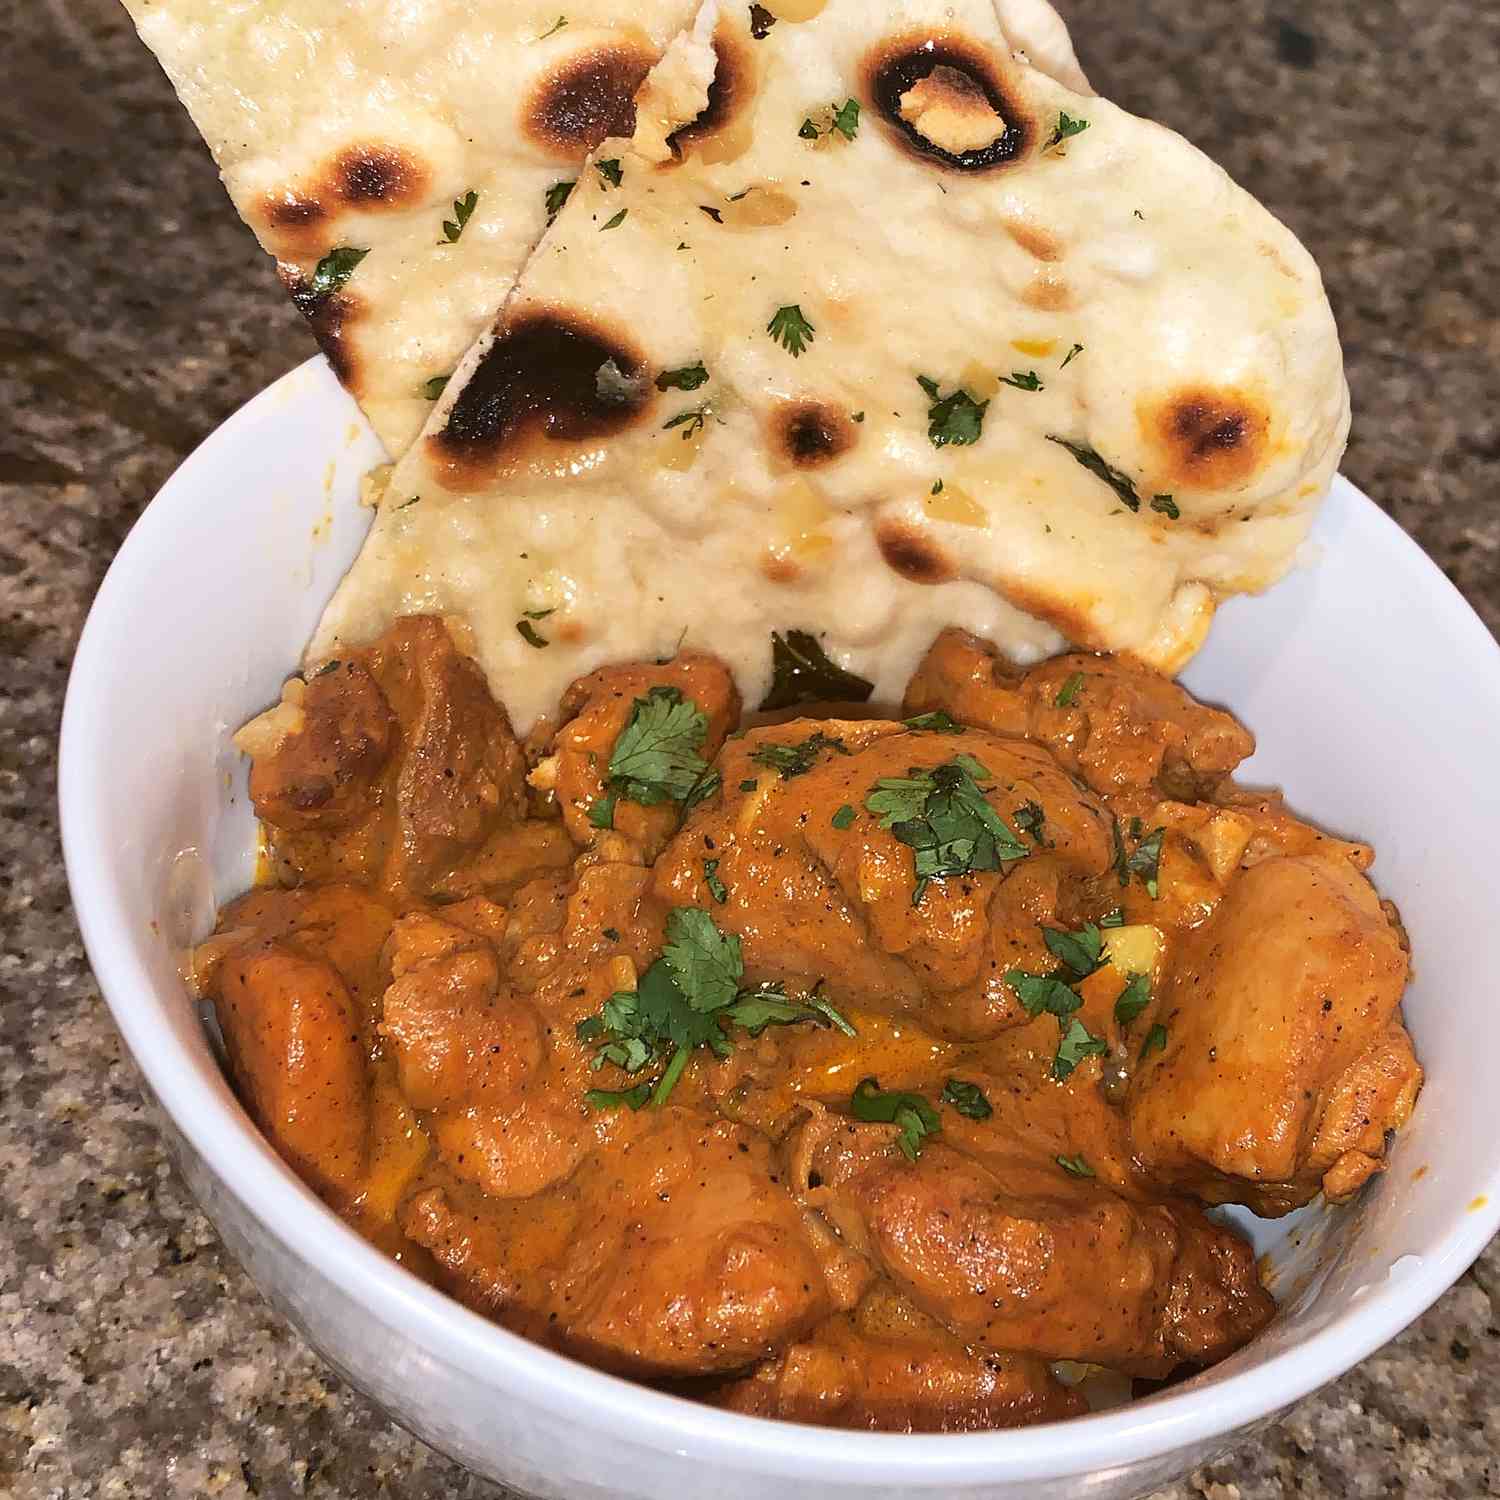 Enjoying butter garlic naan with a steaming hot curry, a perfect culinary combination